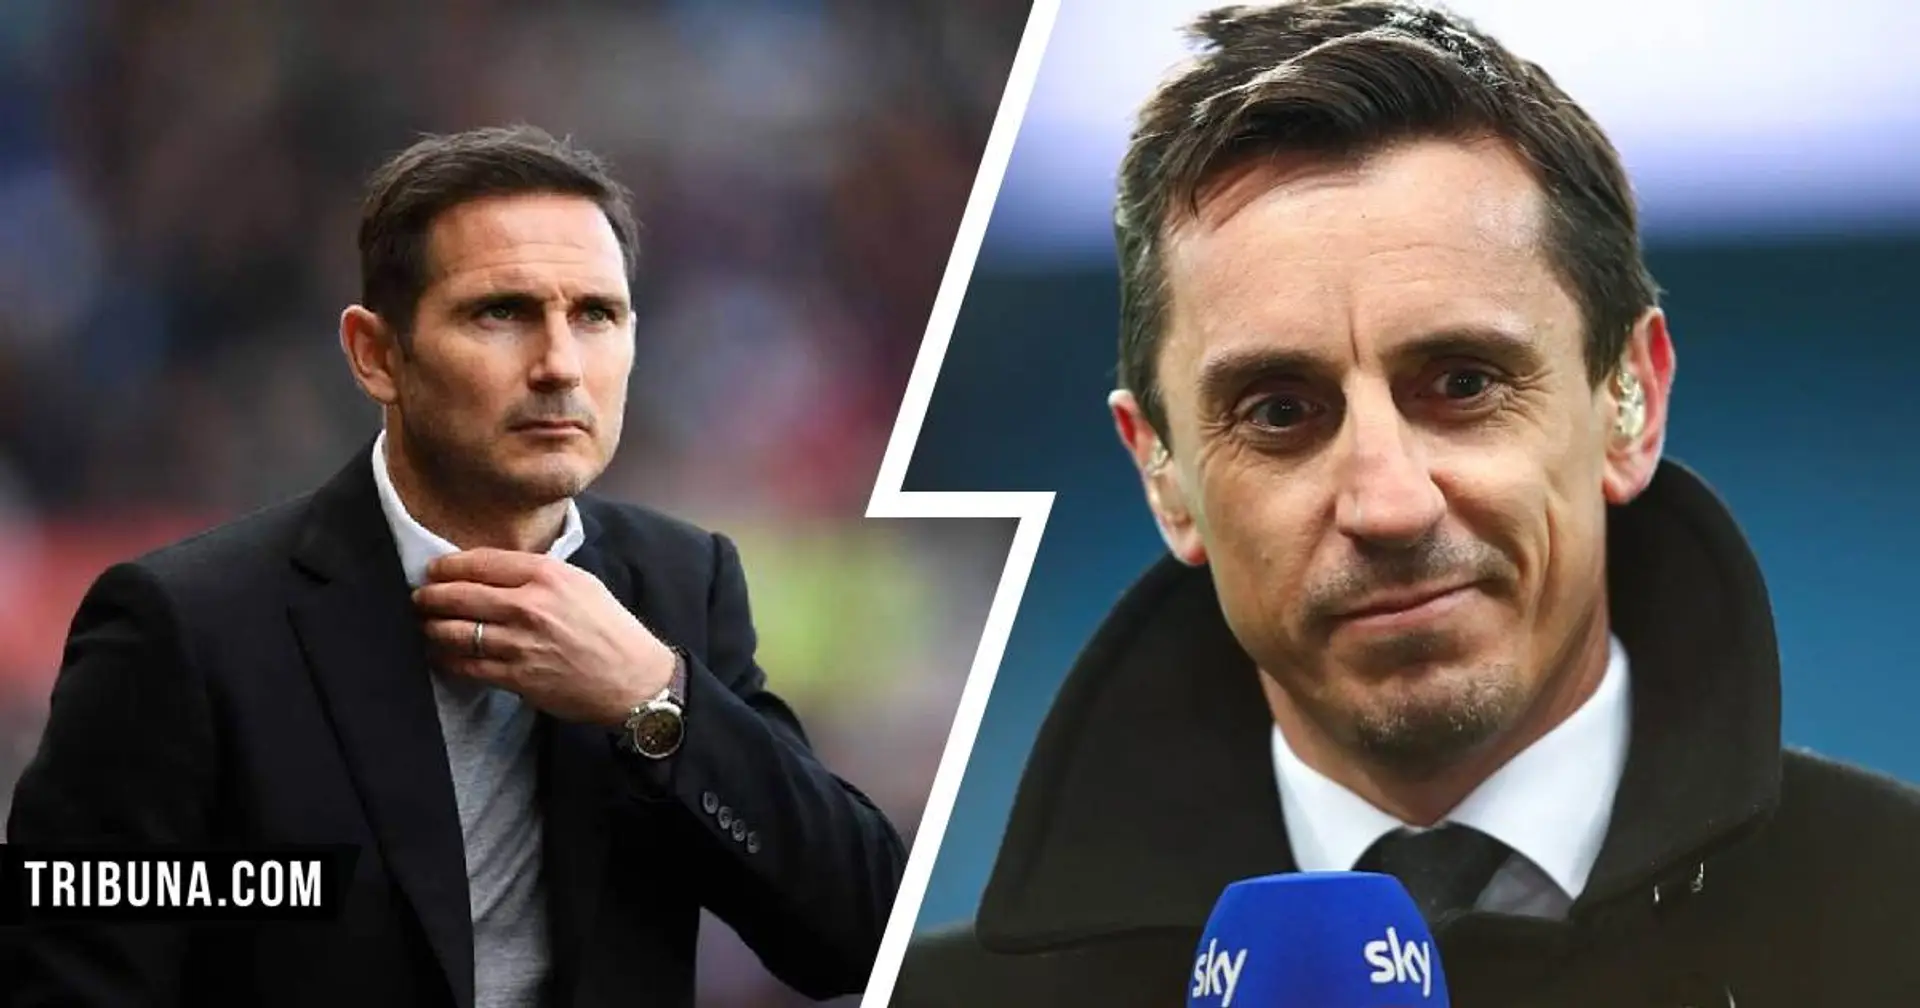 Gary Neville: Frank Lampard needs to be ruthless to win titles